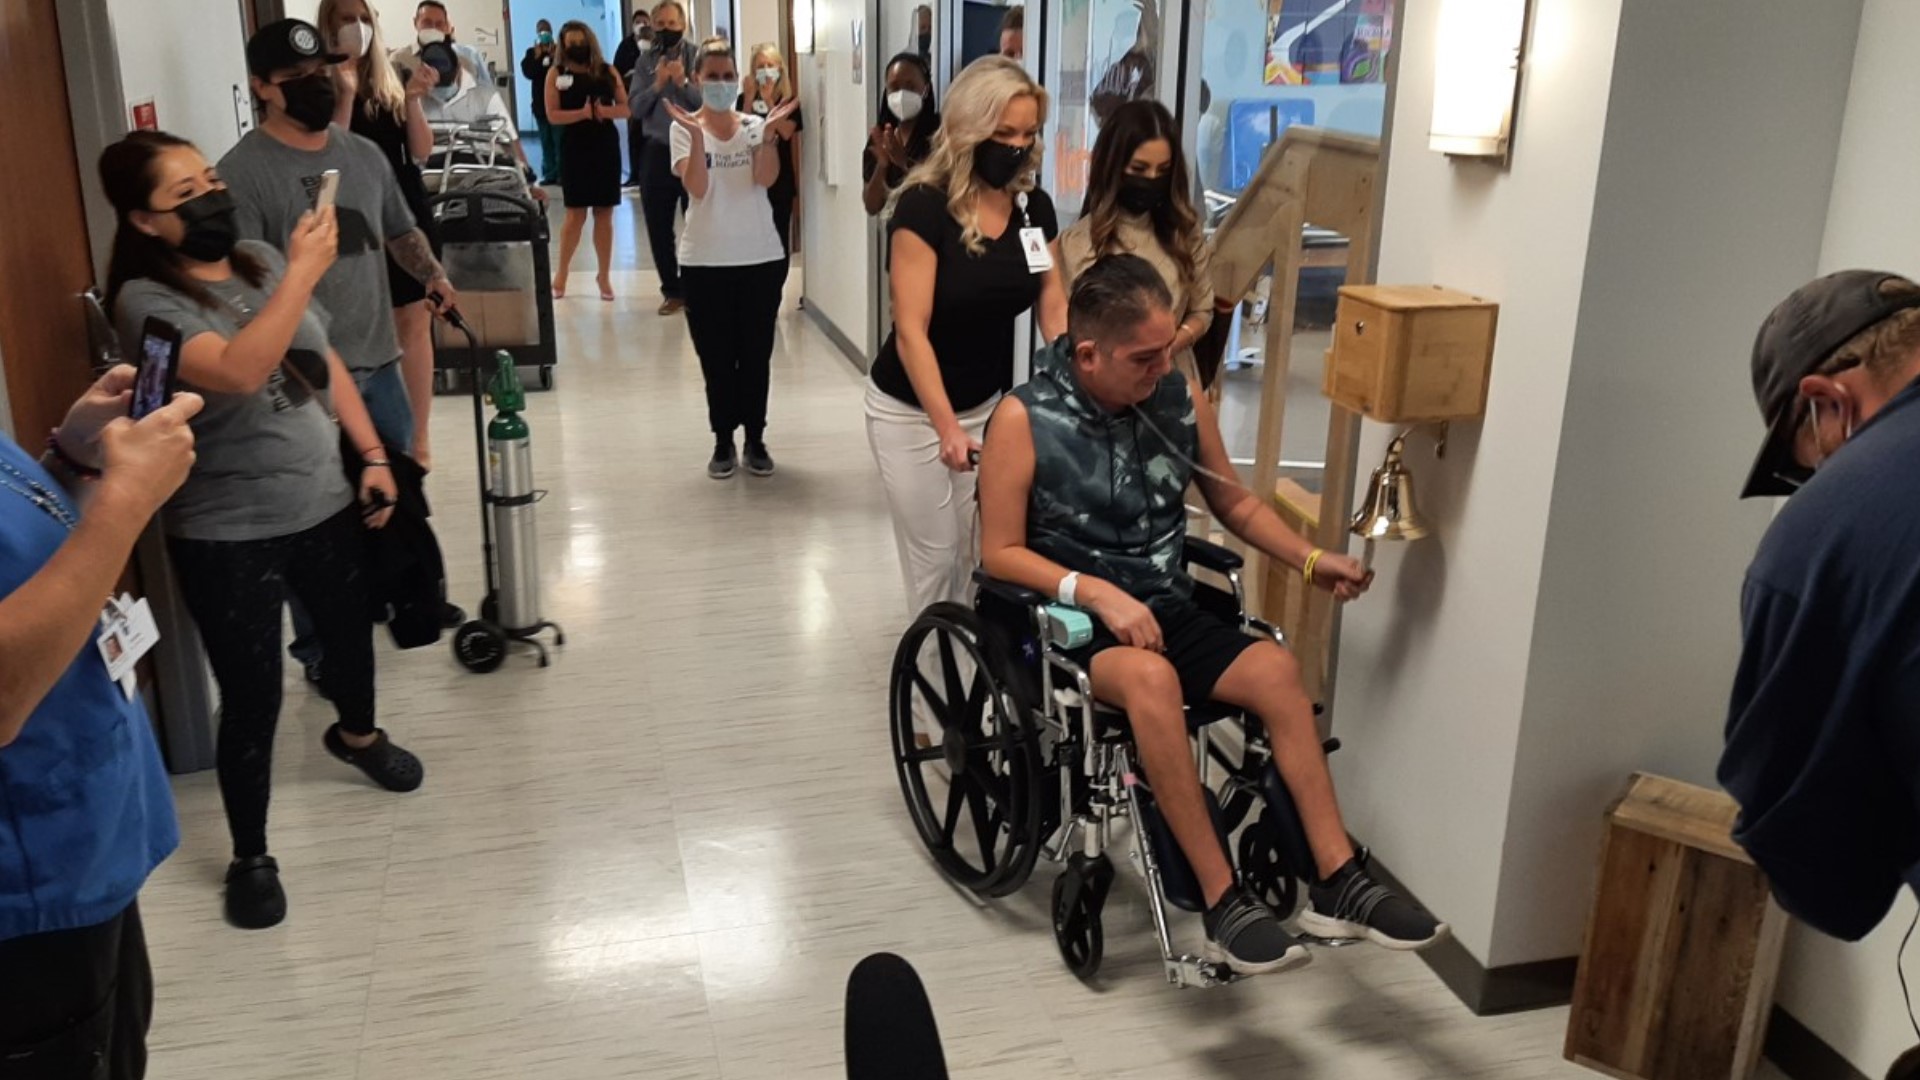 Hugo Miranda has been battling COVID-19 for five very long months. On Thursday, he returned home in the arms of friends and family.